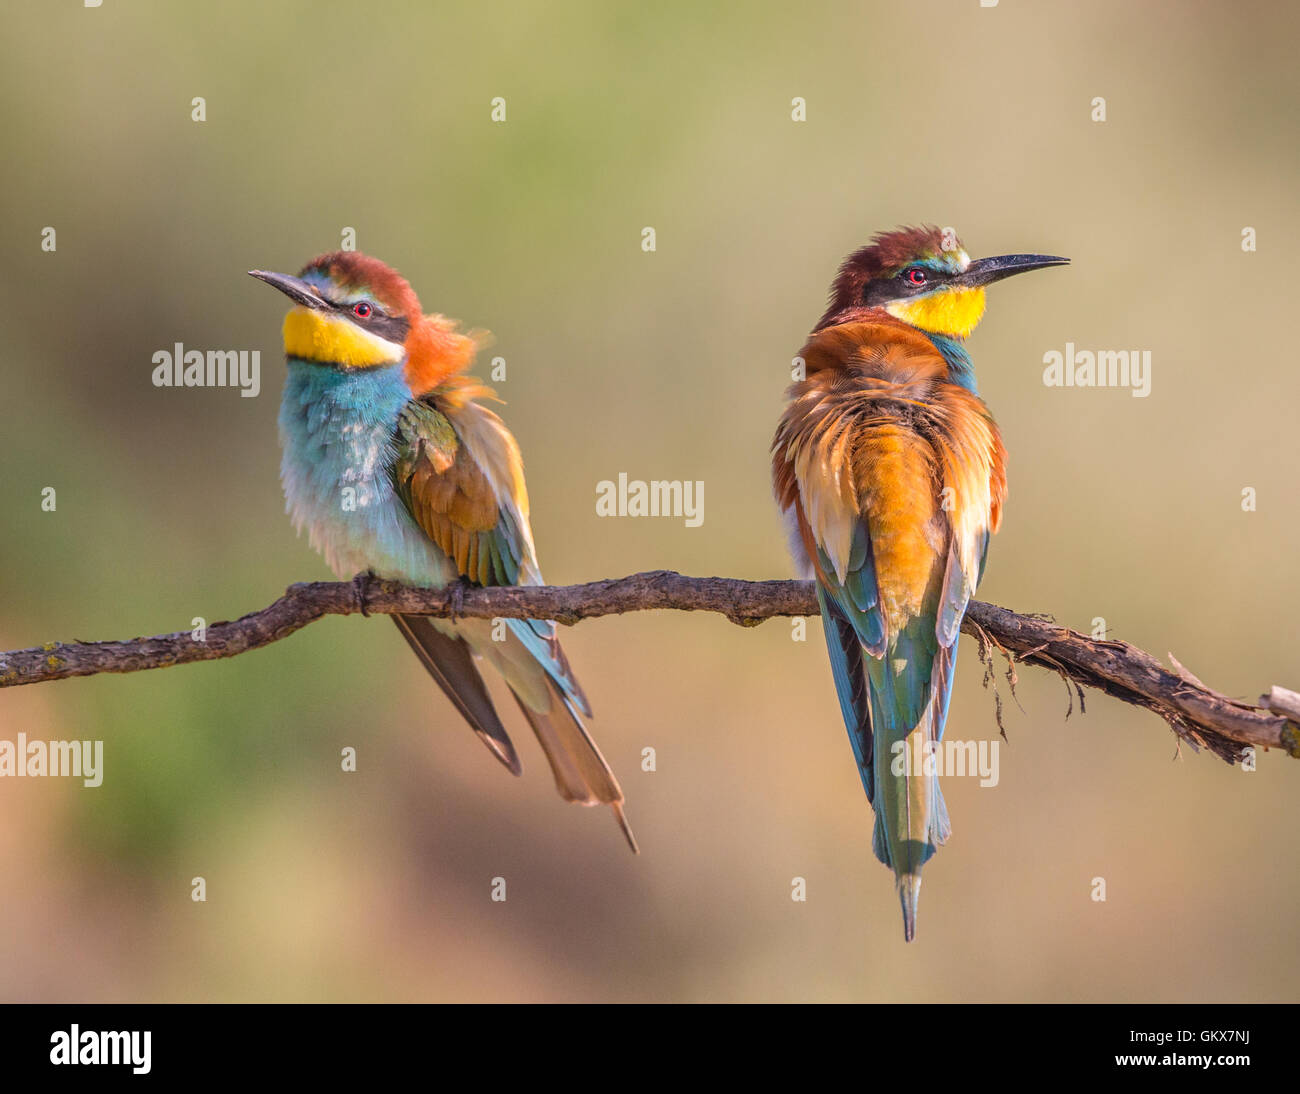 Two European Bee-eaters (Merops apiaster) perching on a branch Stock Photo